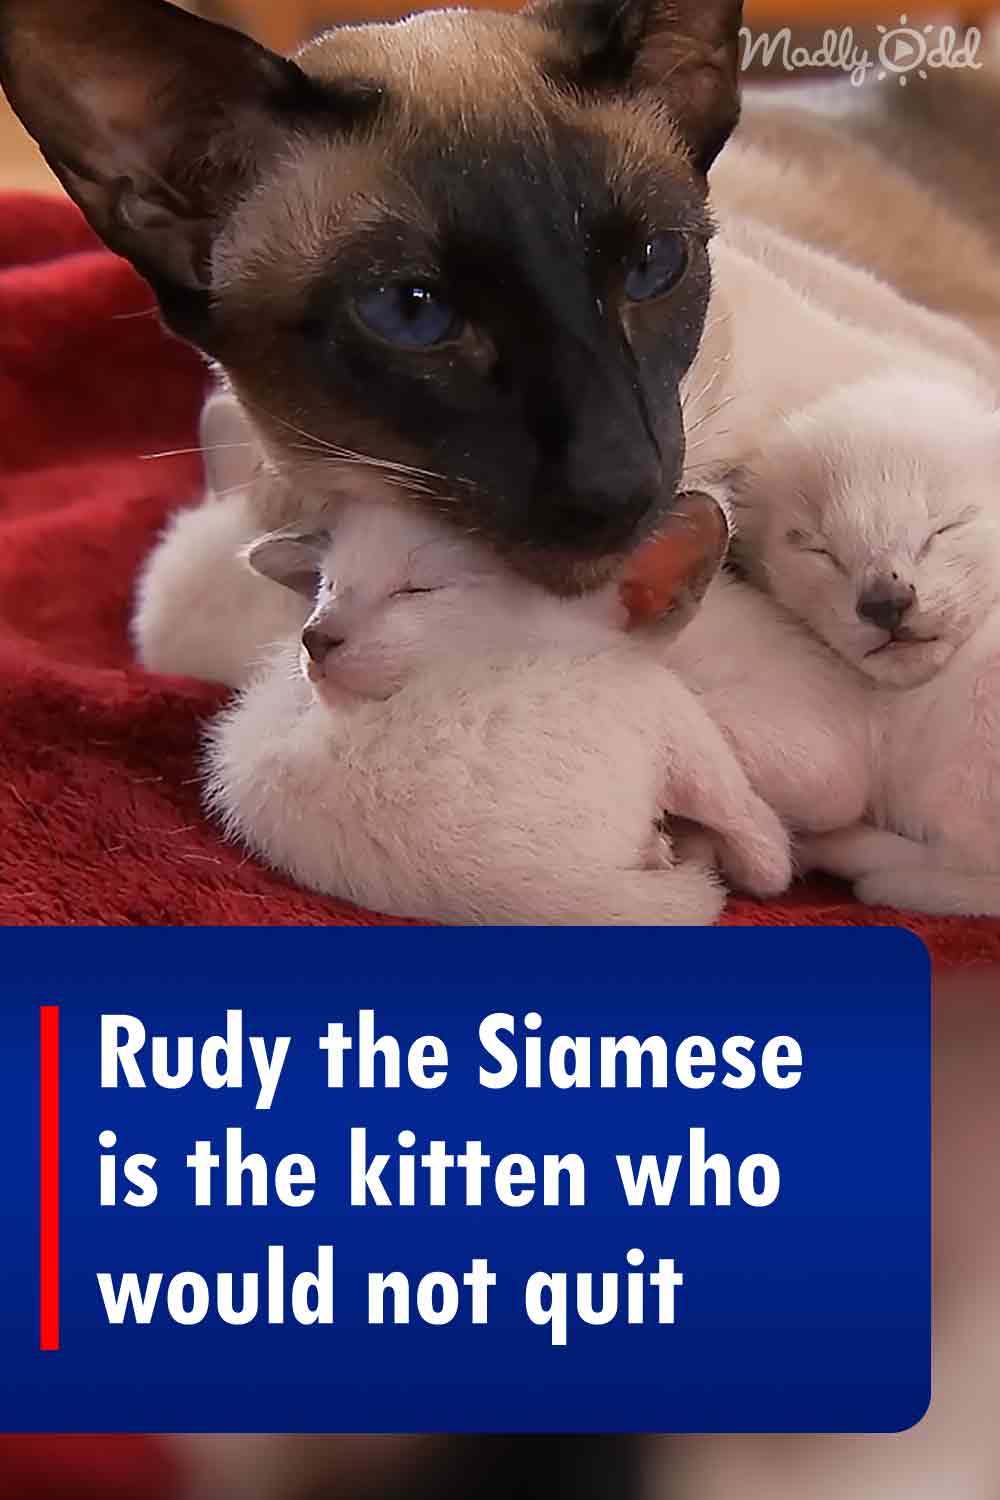 Rudy the Siamese is the kitten who would not quit